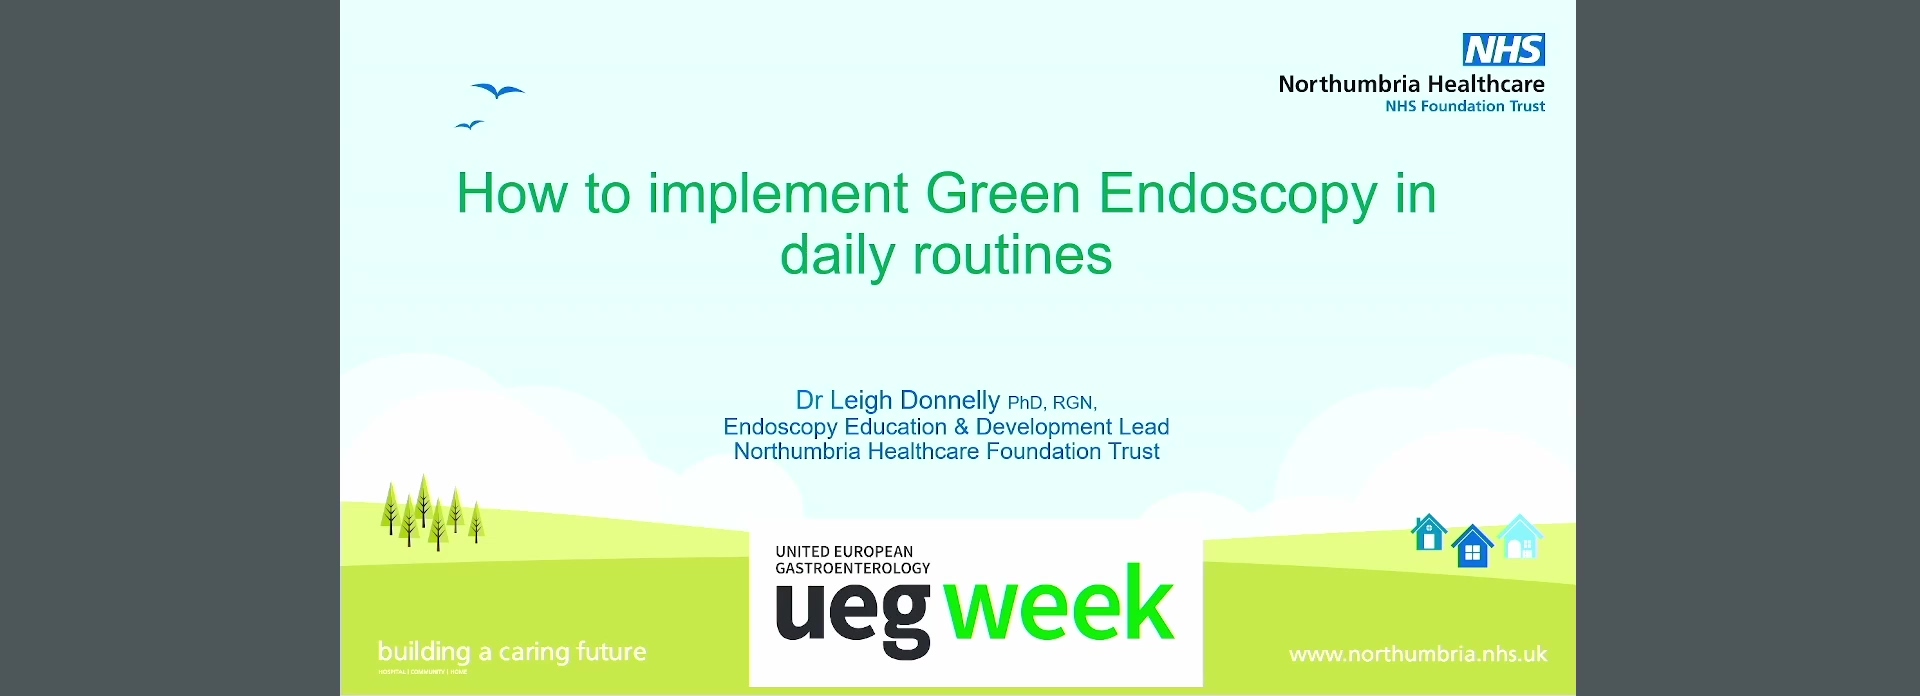 How to implement “green endoscopy” in daily routines?